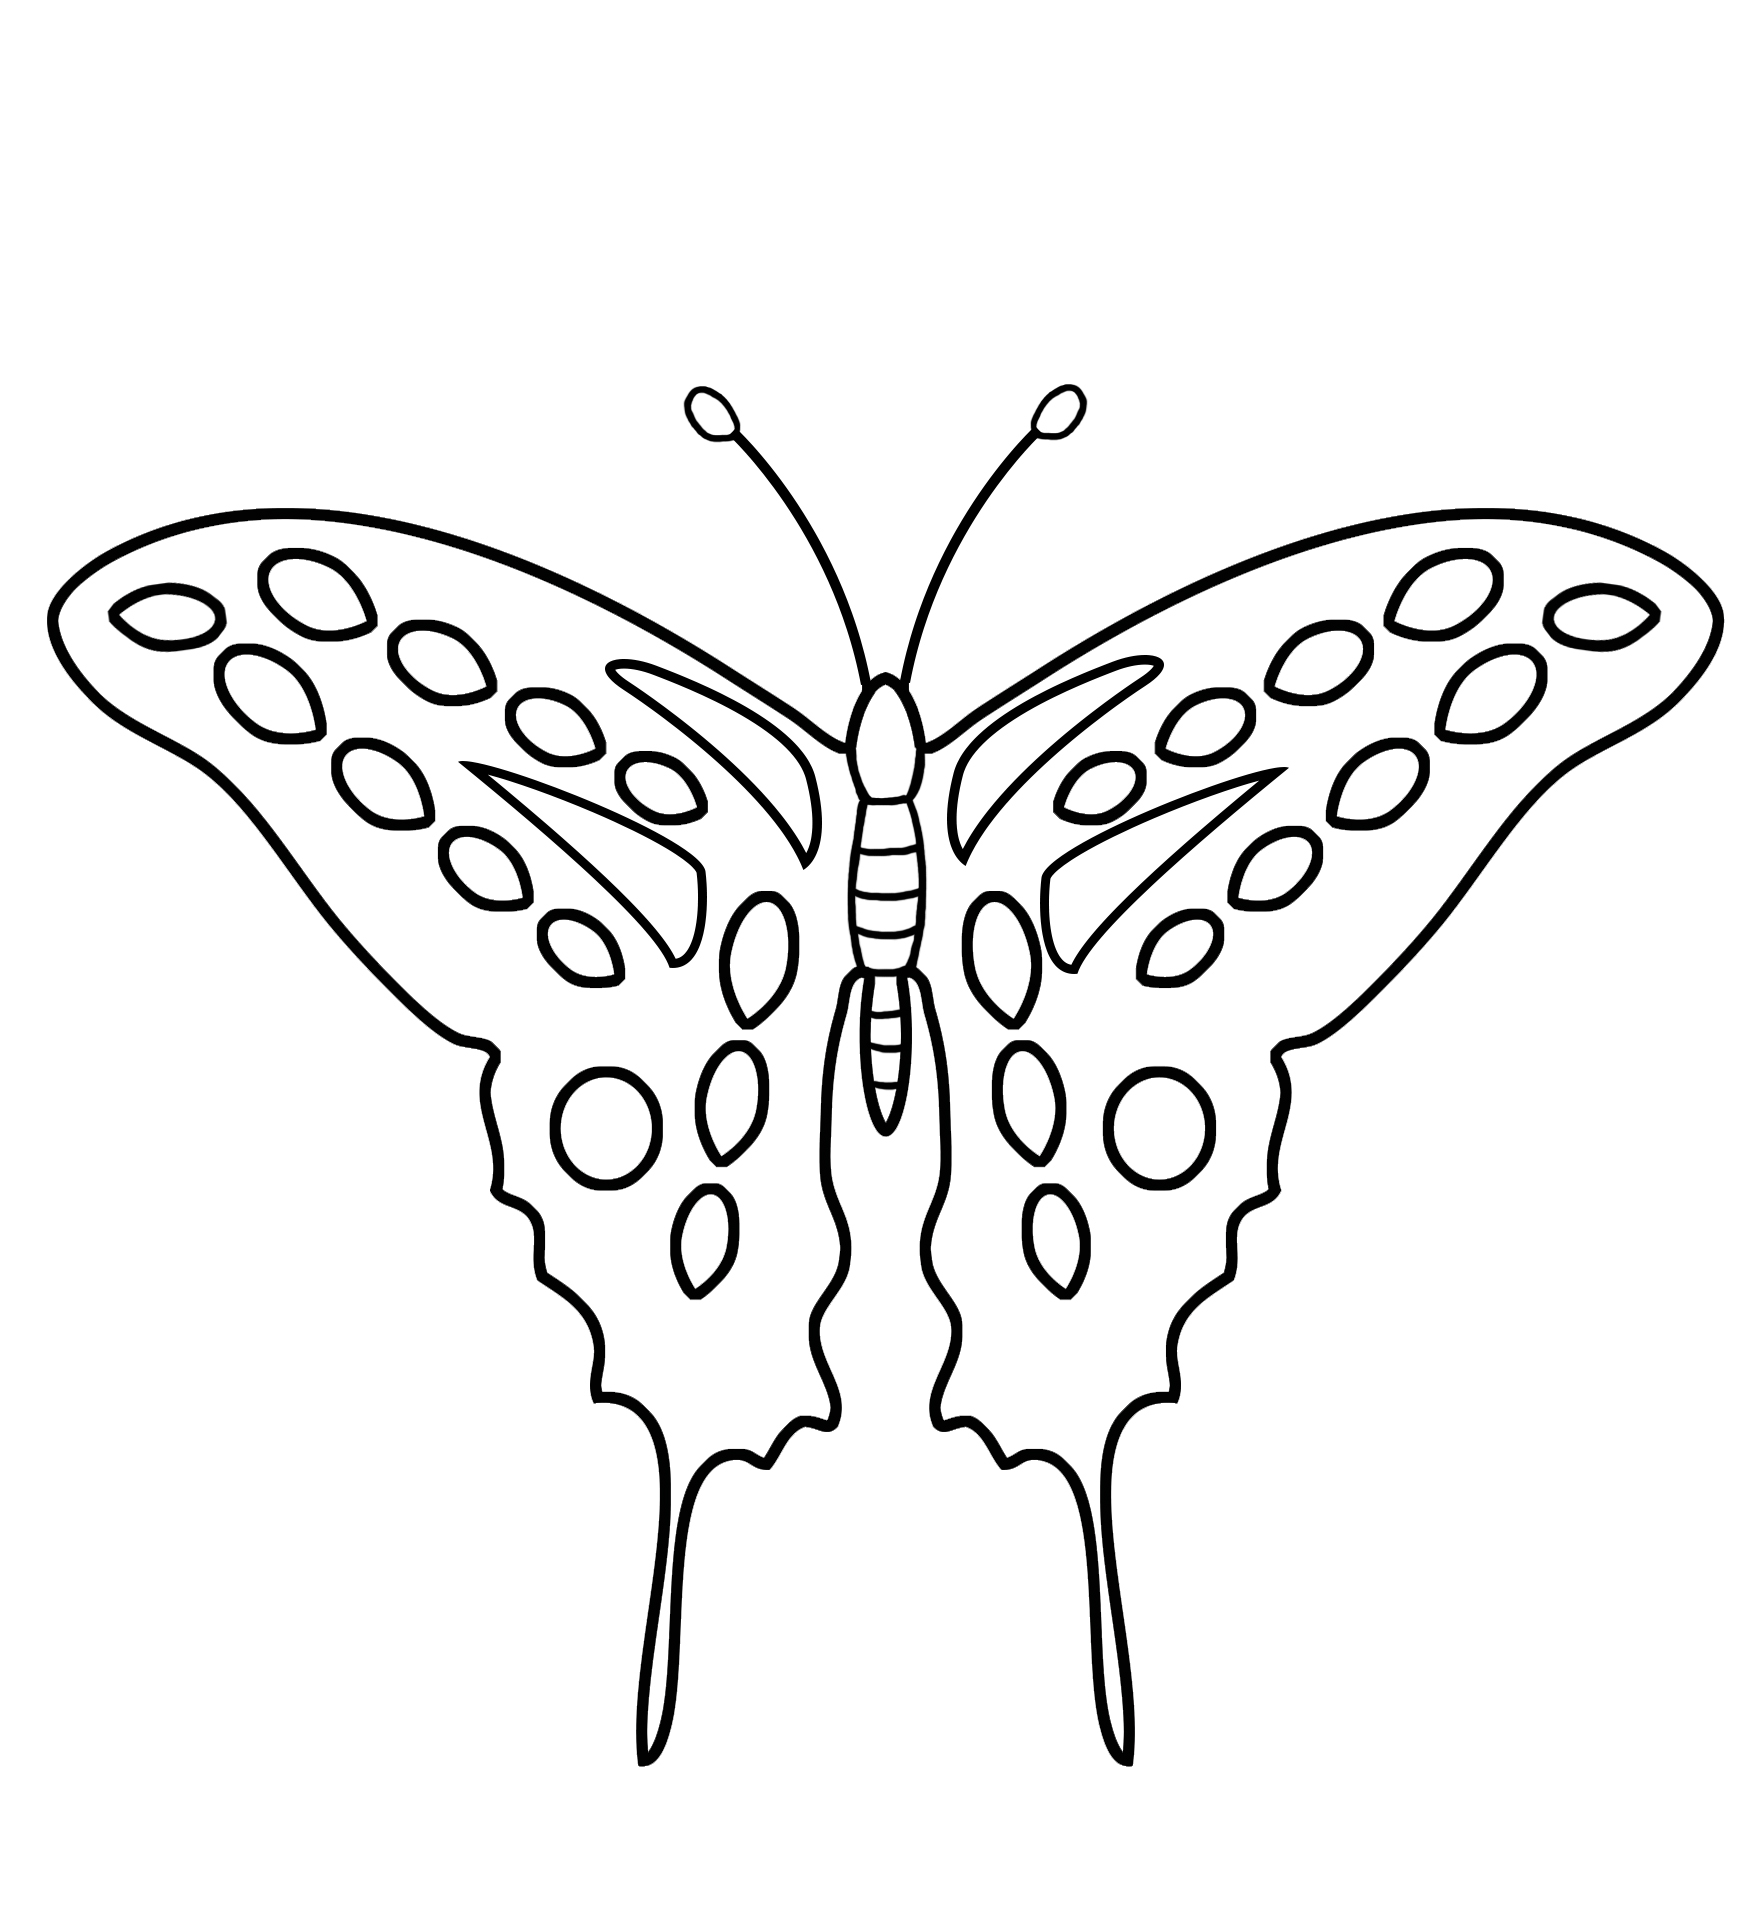 coloring page for kids with butterfly